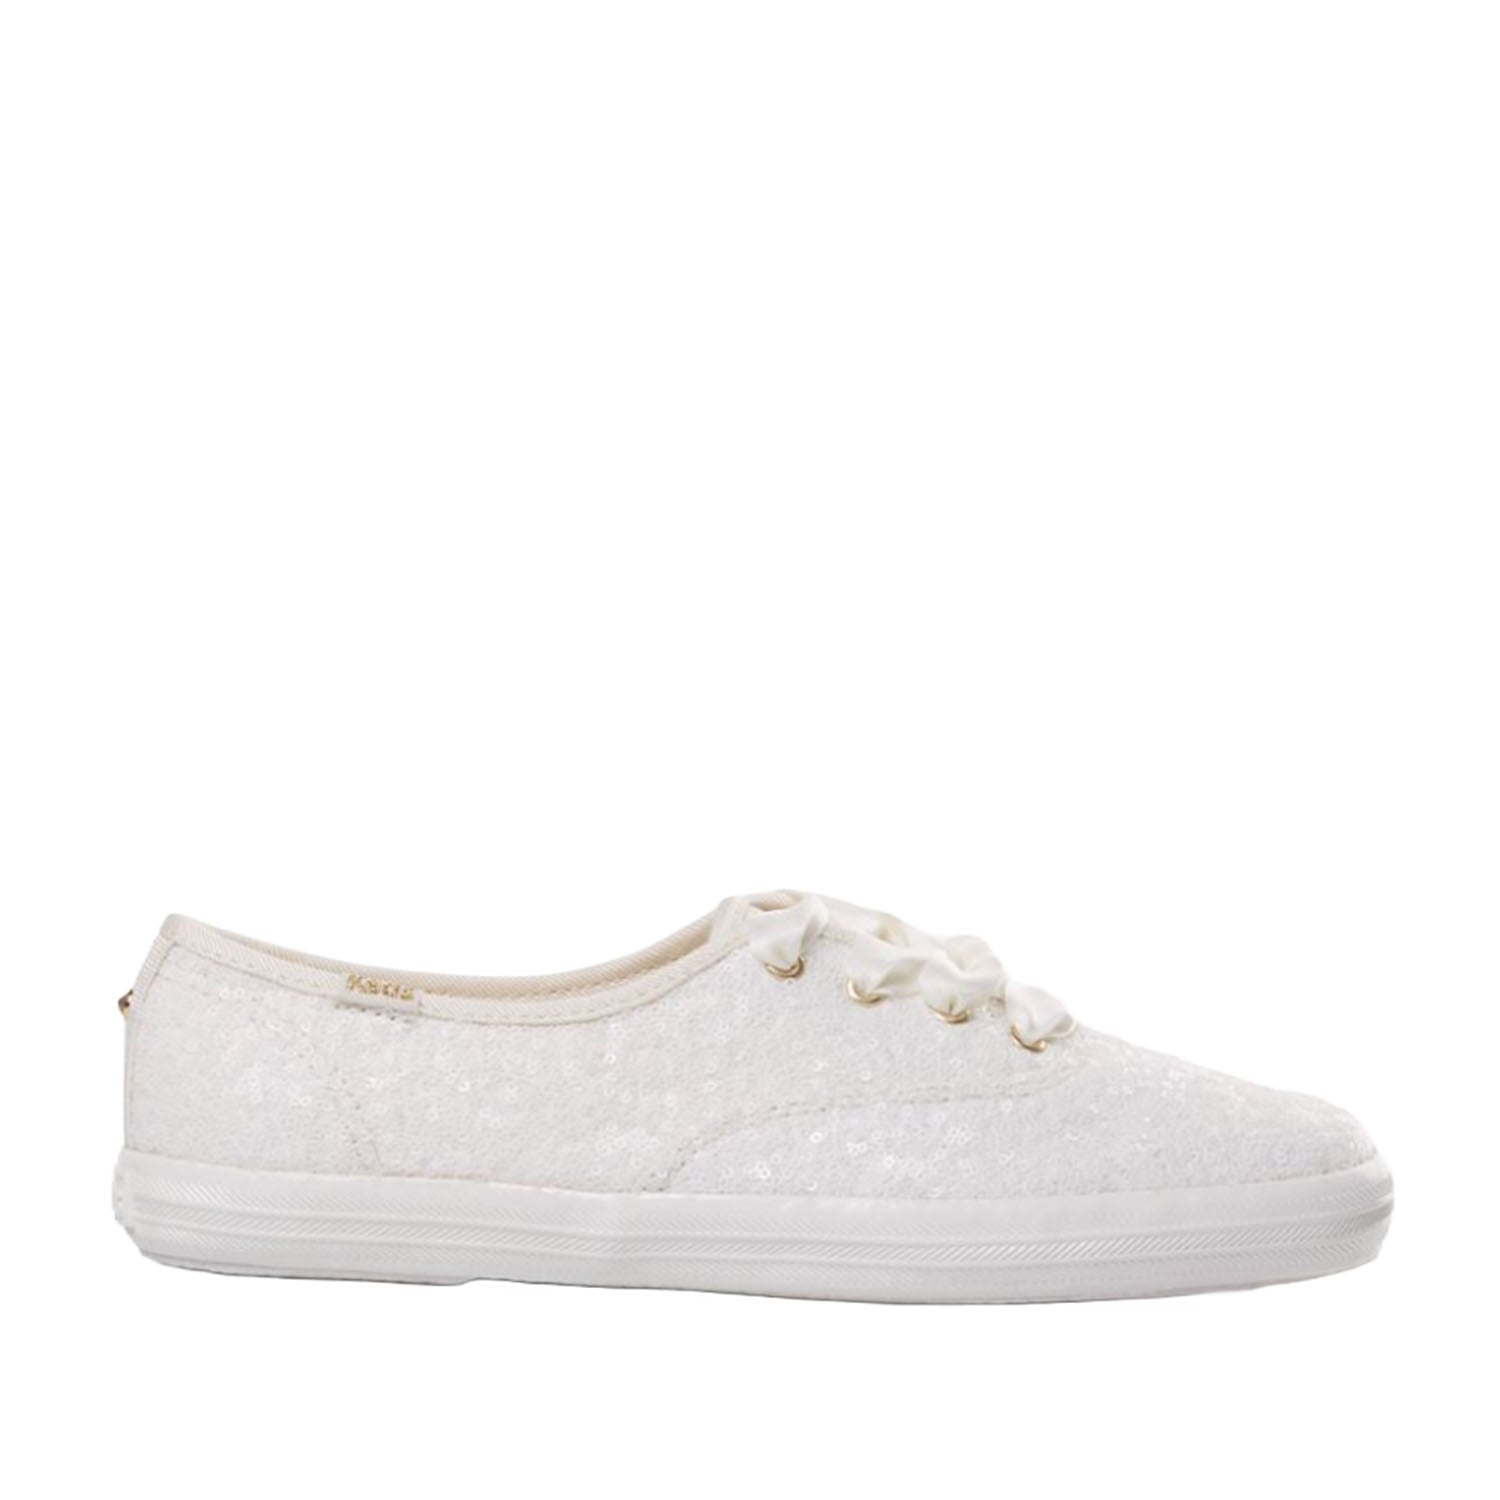 Keds Women's Champion Sequins Celebration in Off White